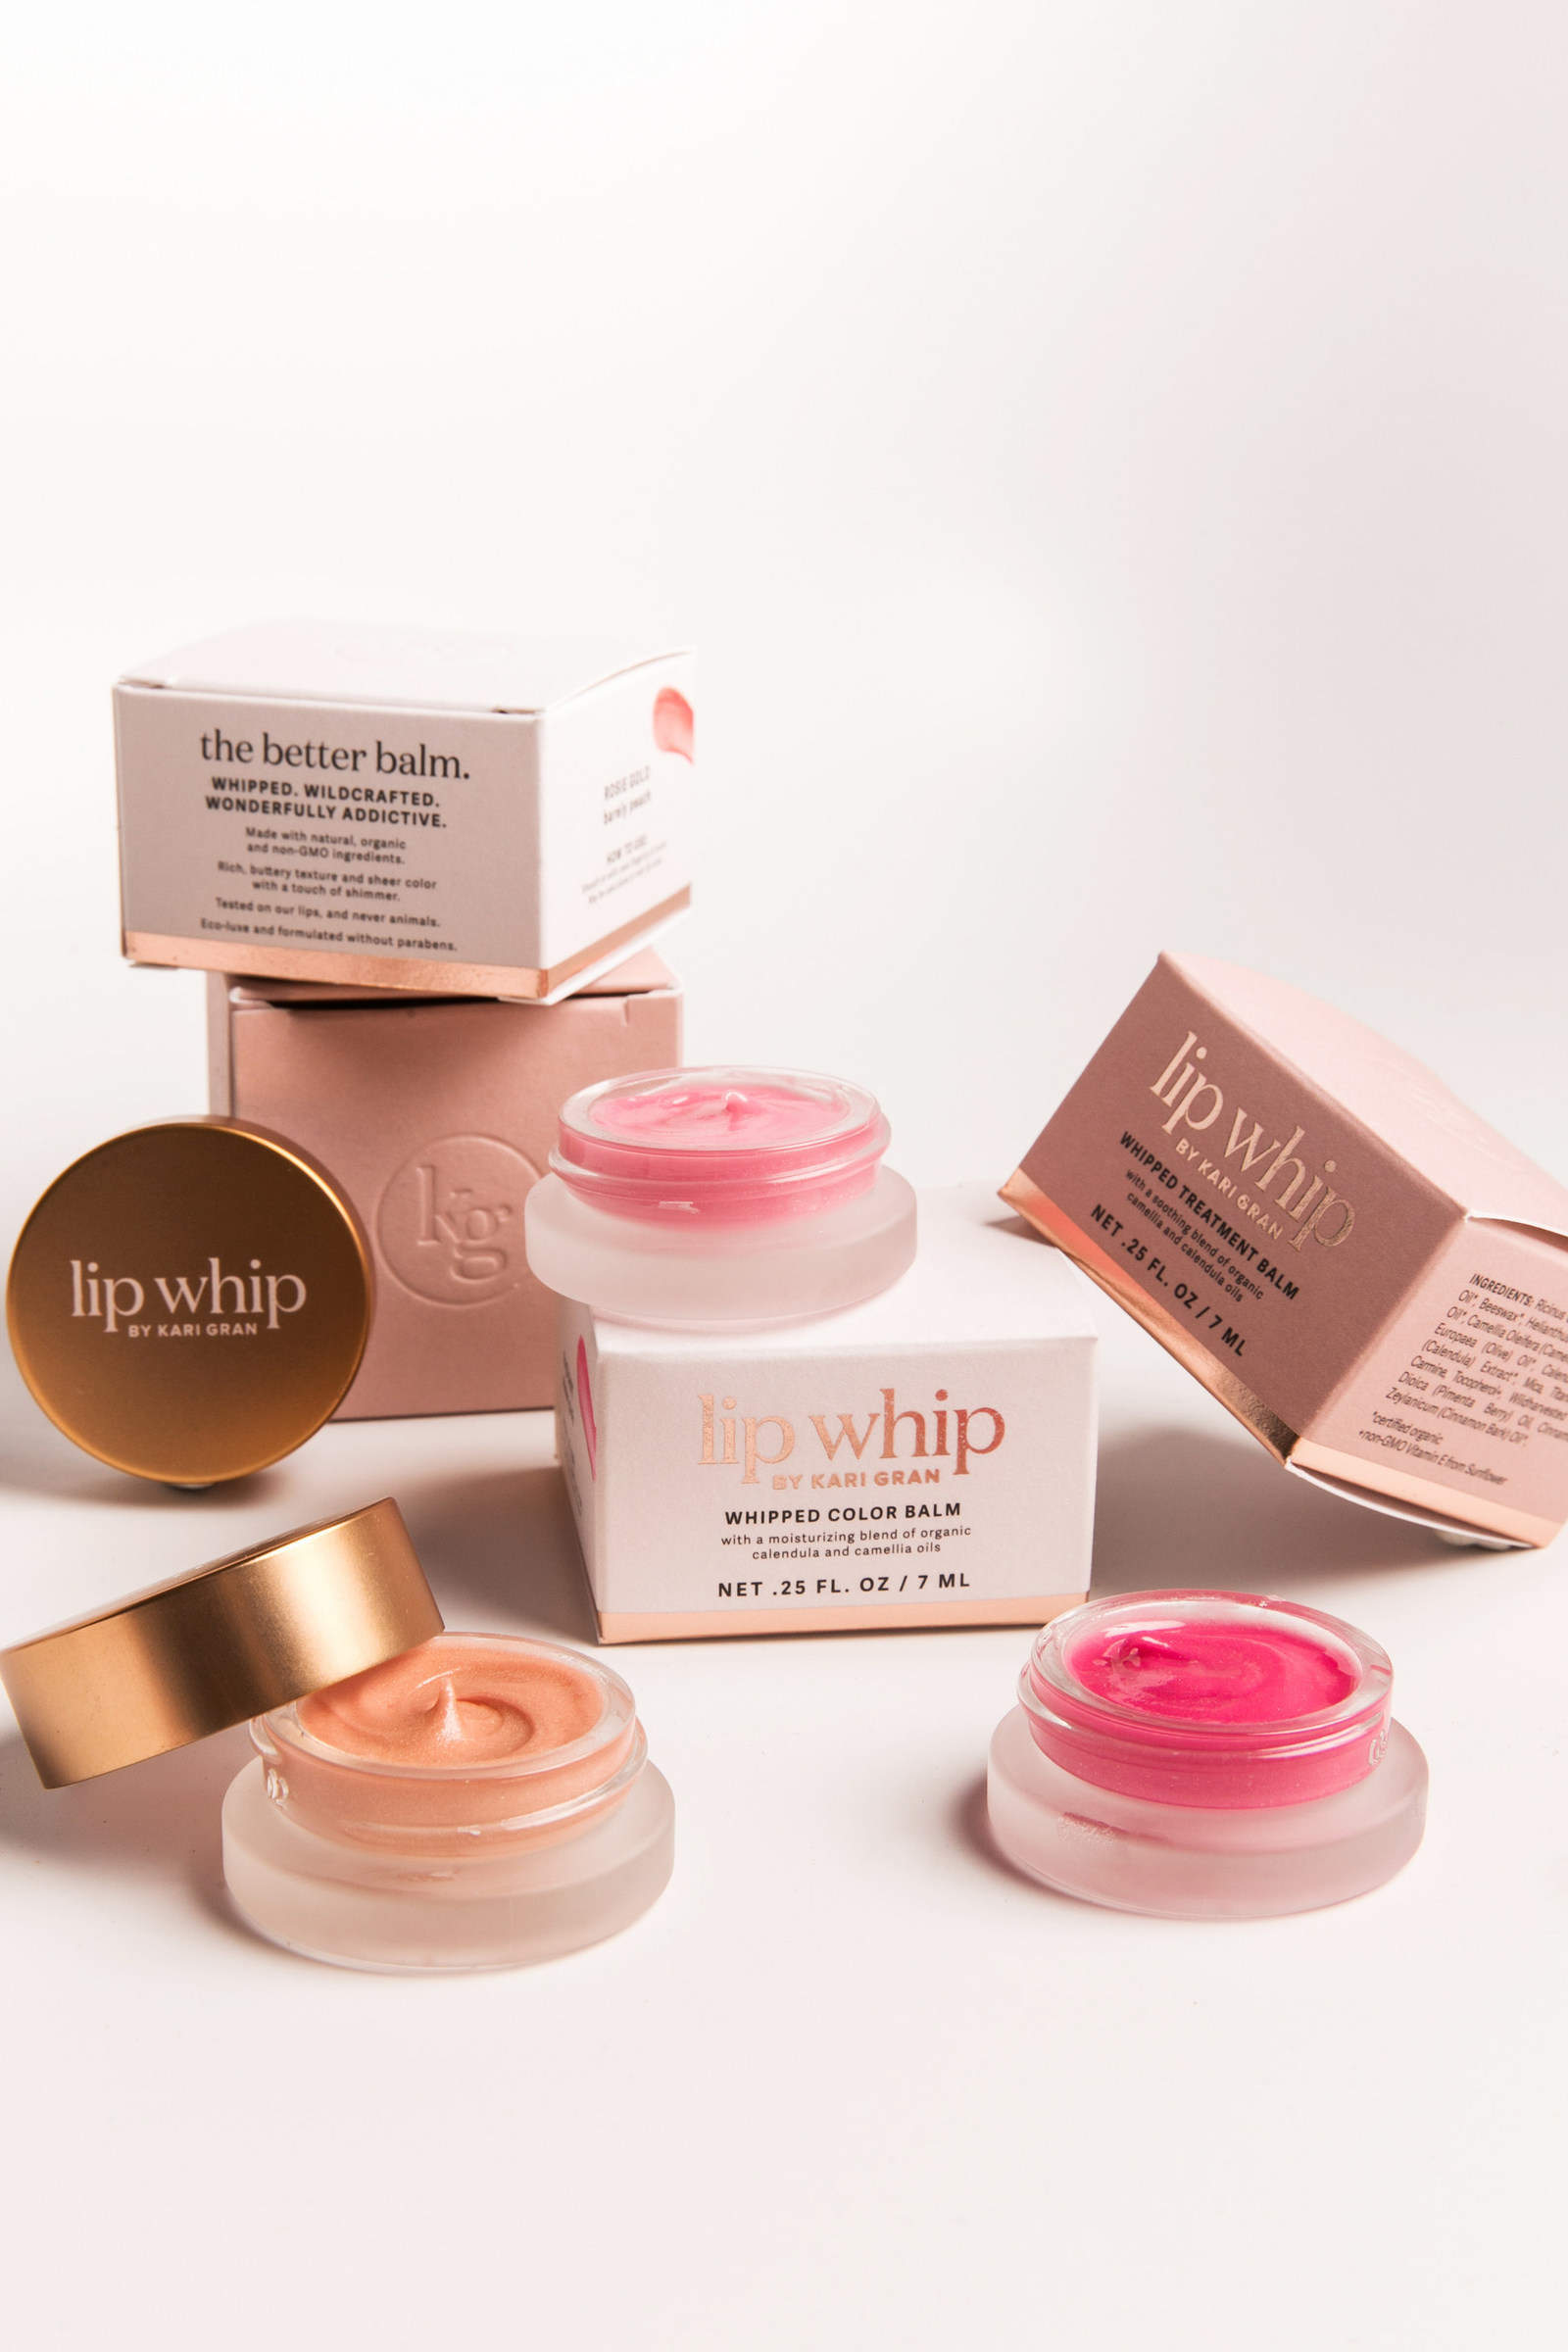 Kari Gran unveils new packaging for lip product line